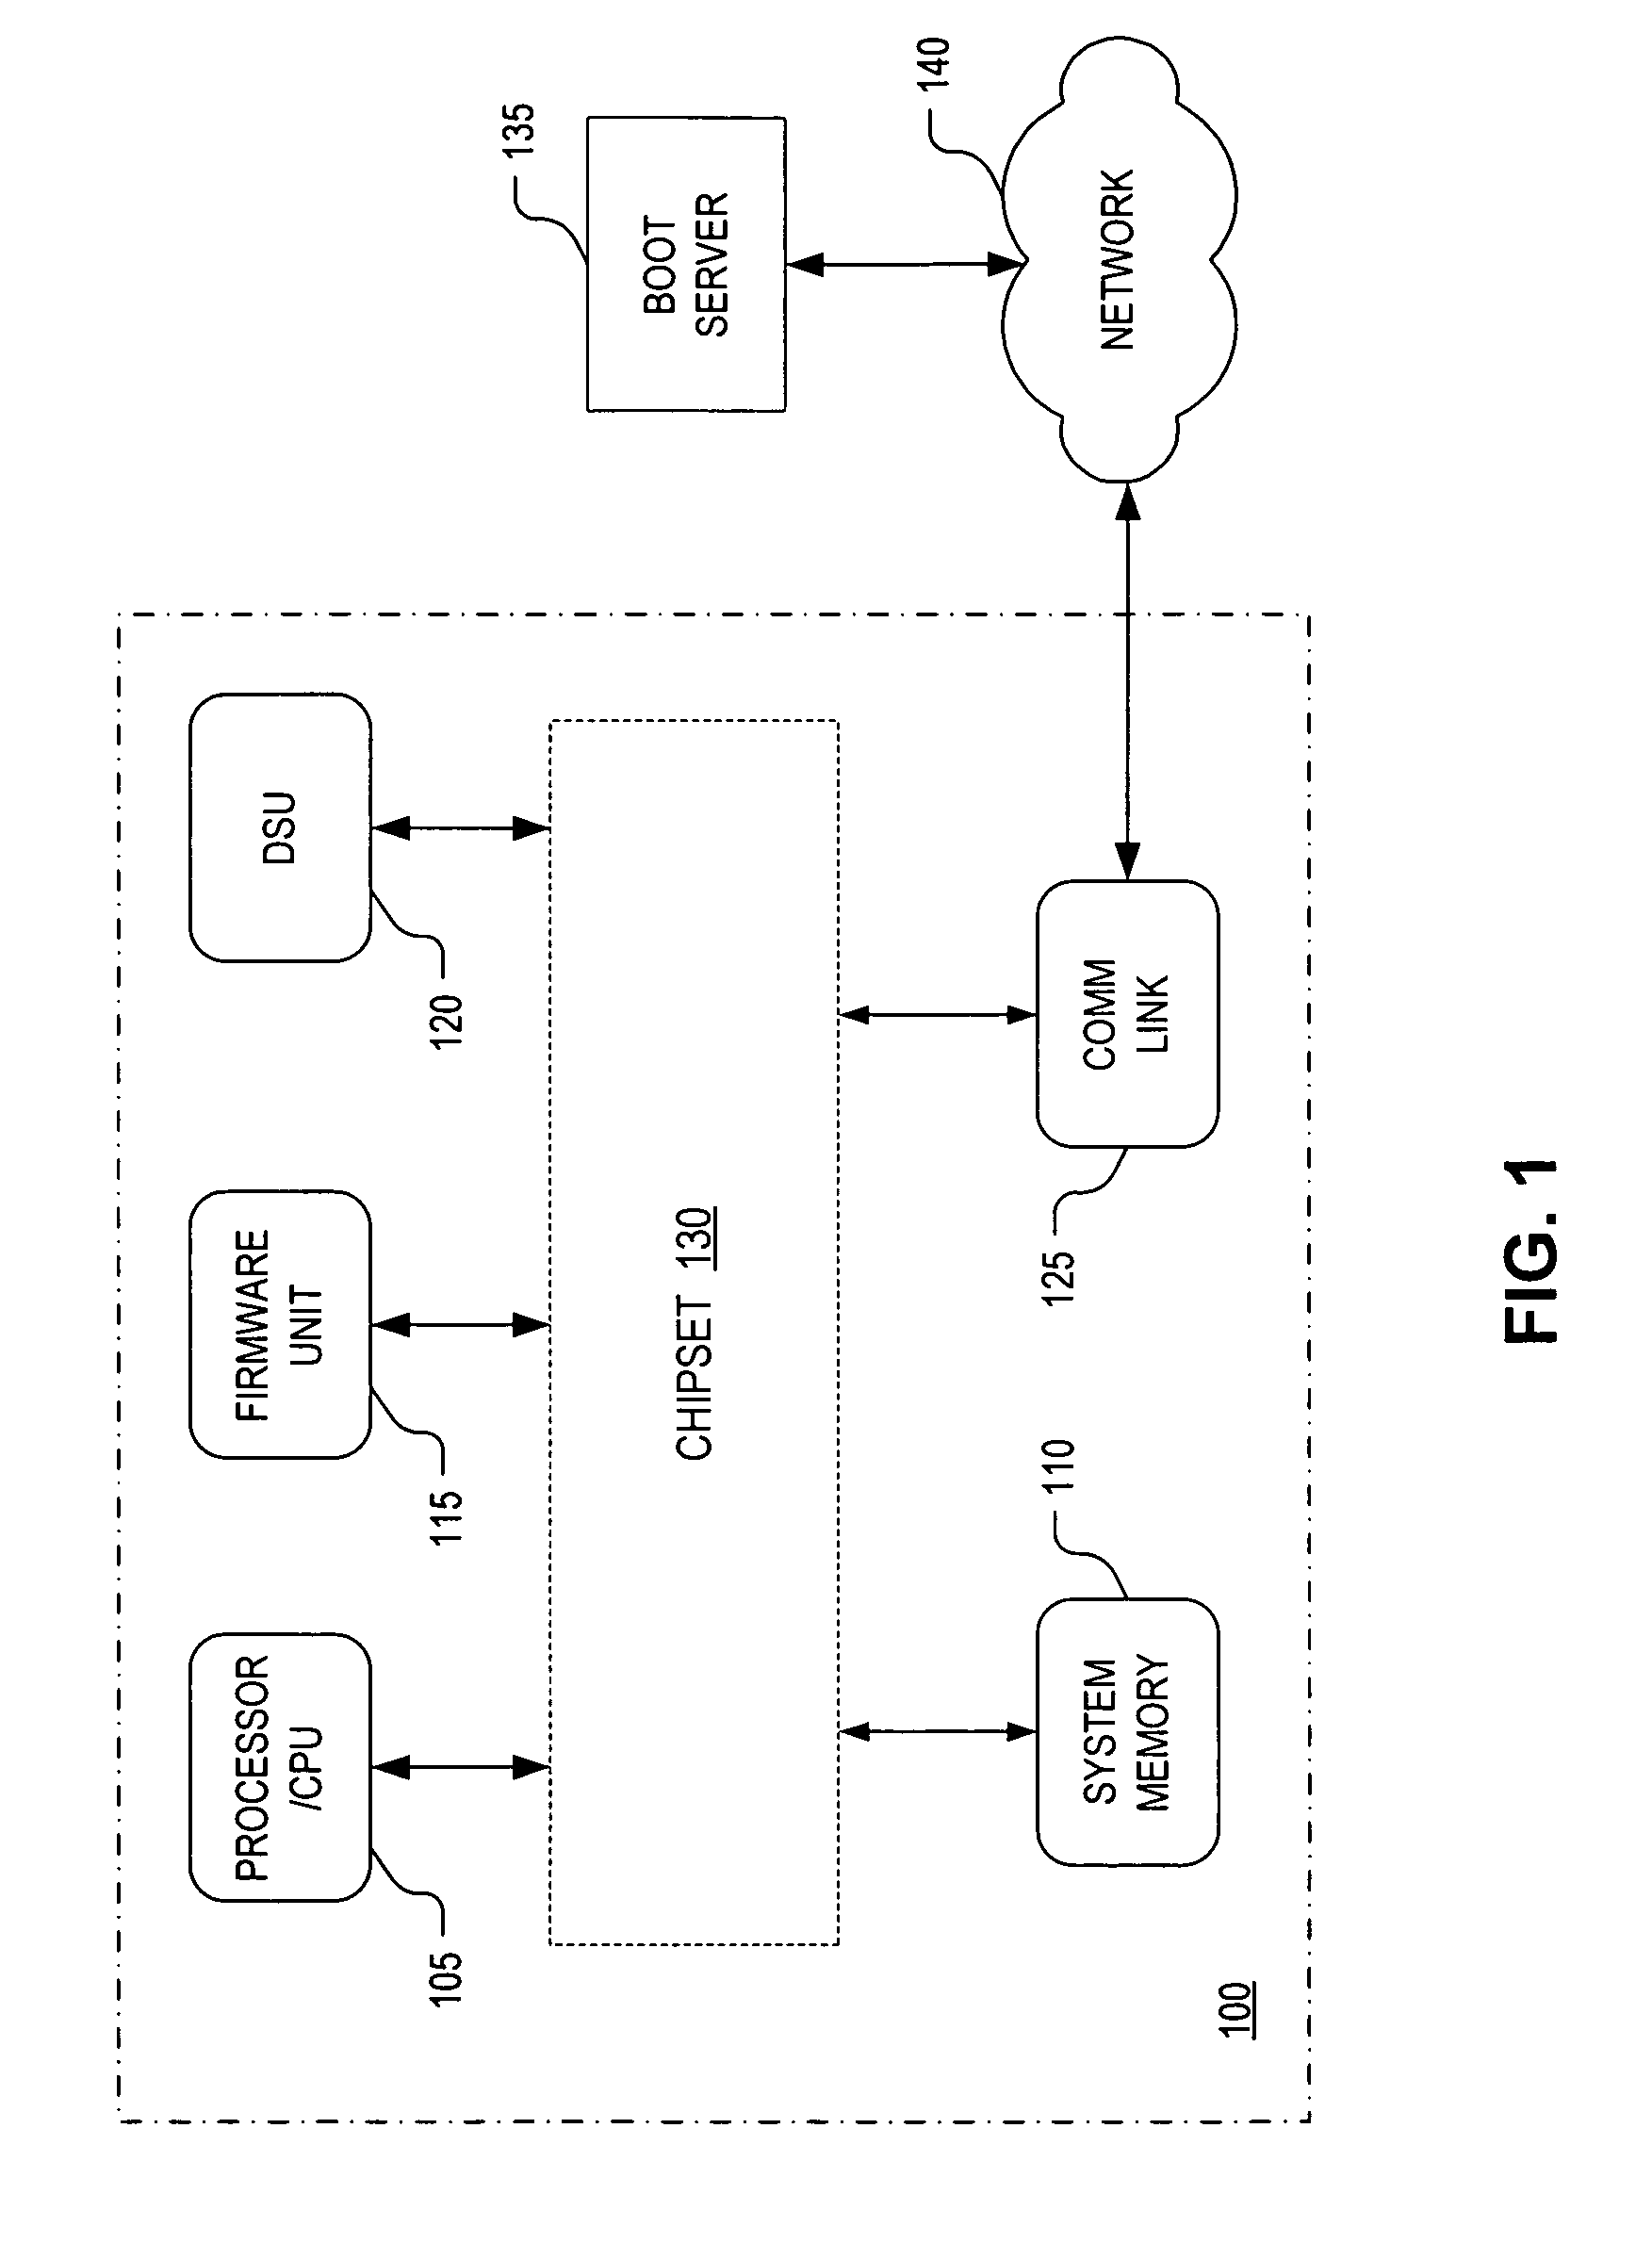 Firmware interfacing with network protocol offload engines to provide fast network booting, system repurposing, system provisioning, system manageability, and disaster recovery